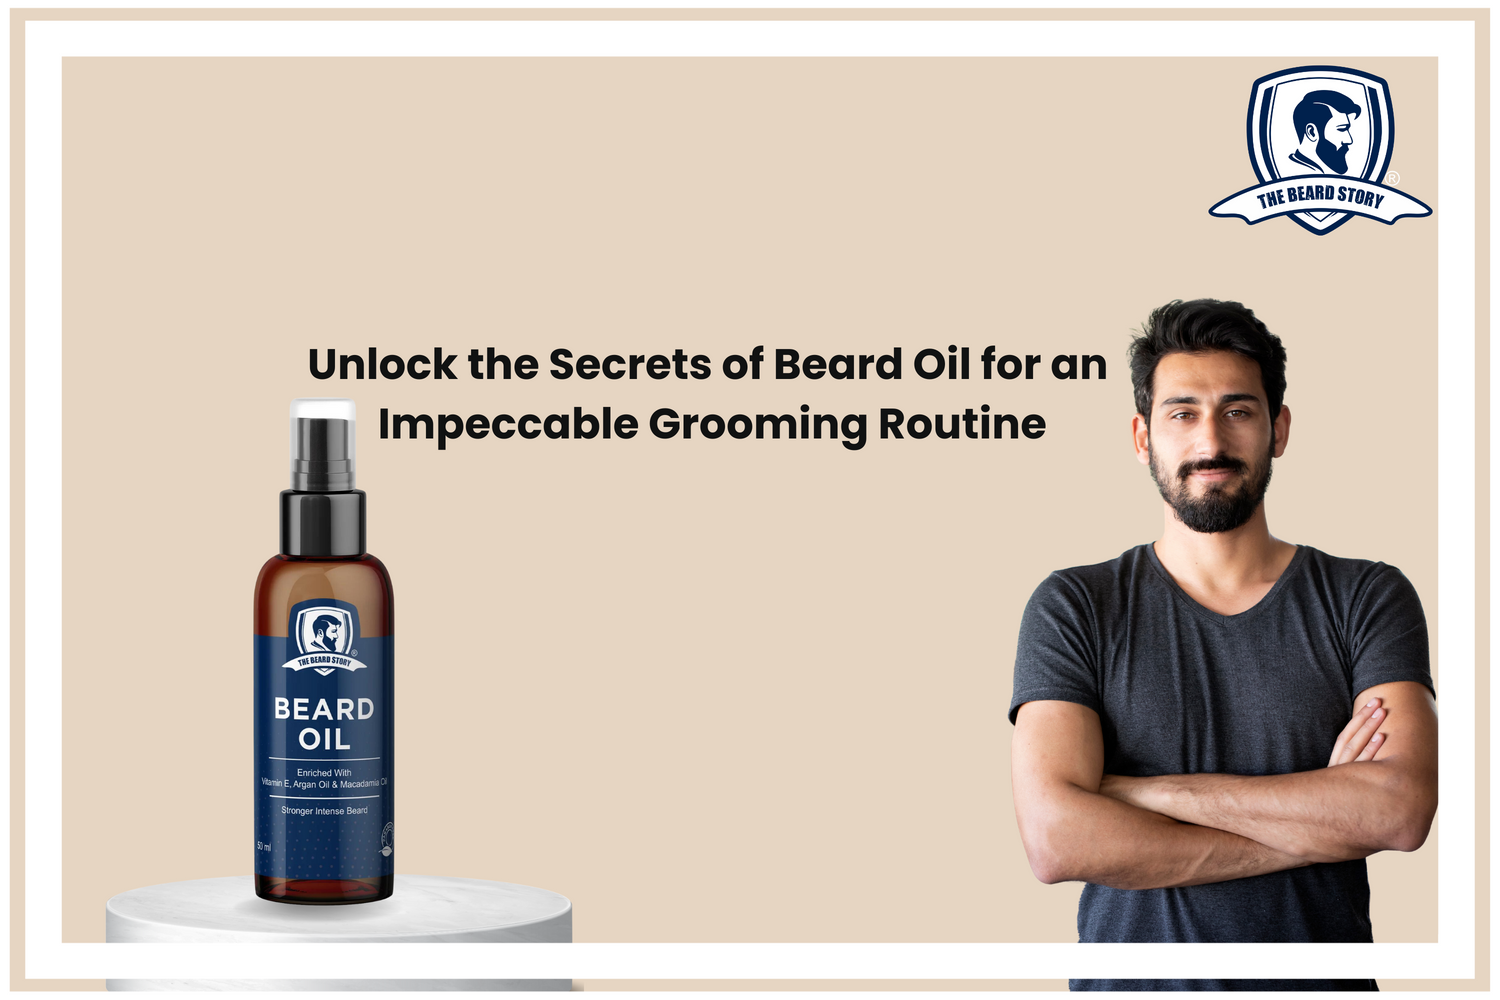 Unlock the Secrets of Beard Oil for an Impeccable Grooming Routine